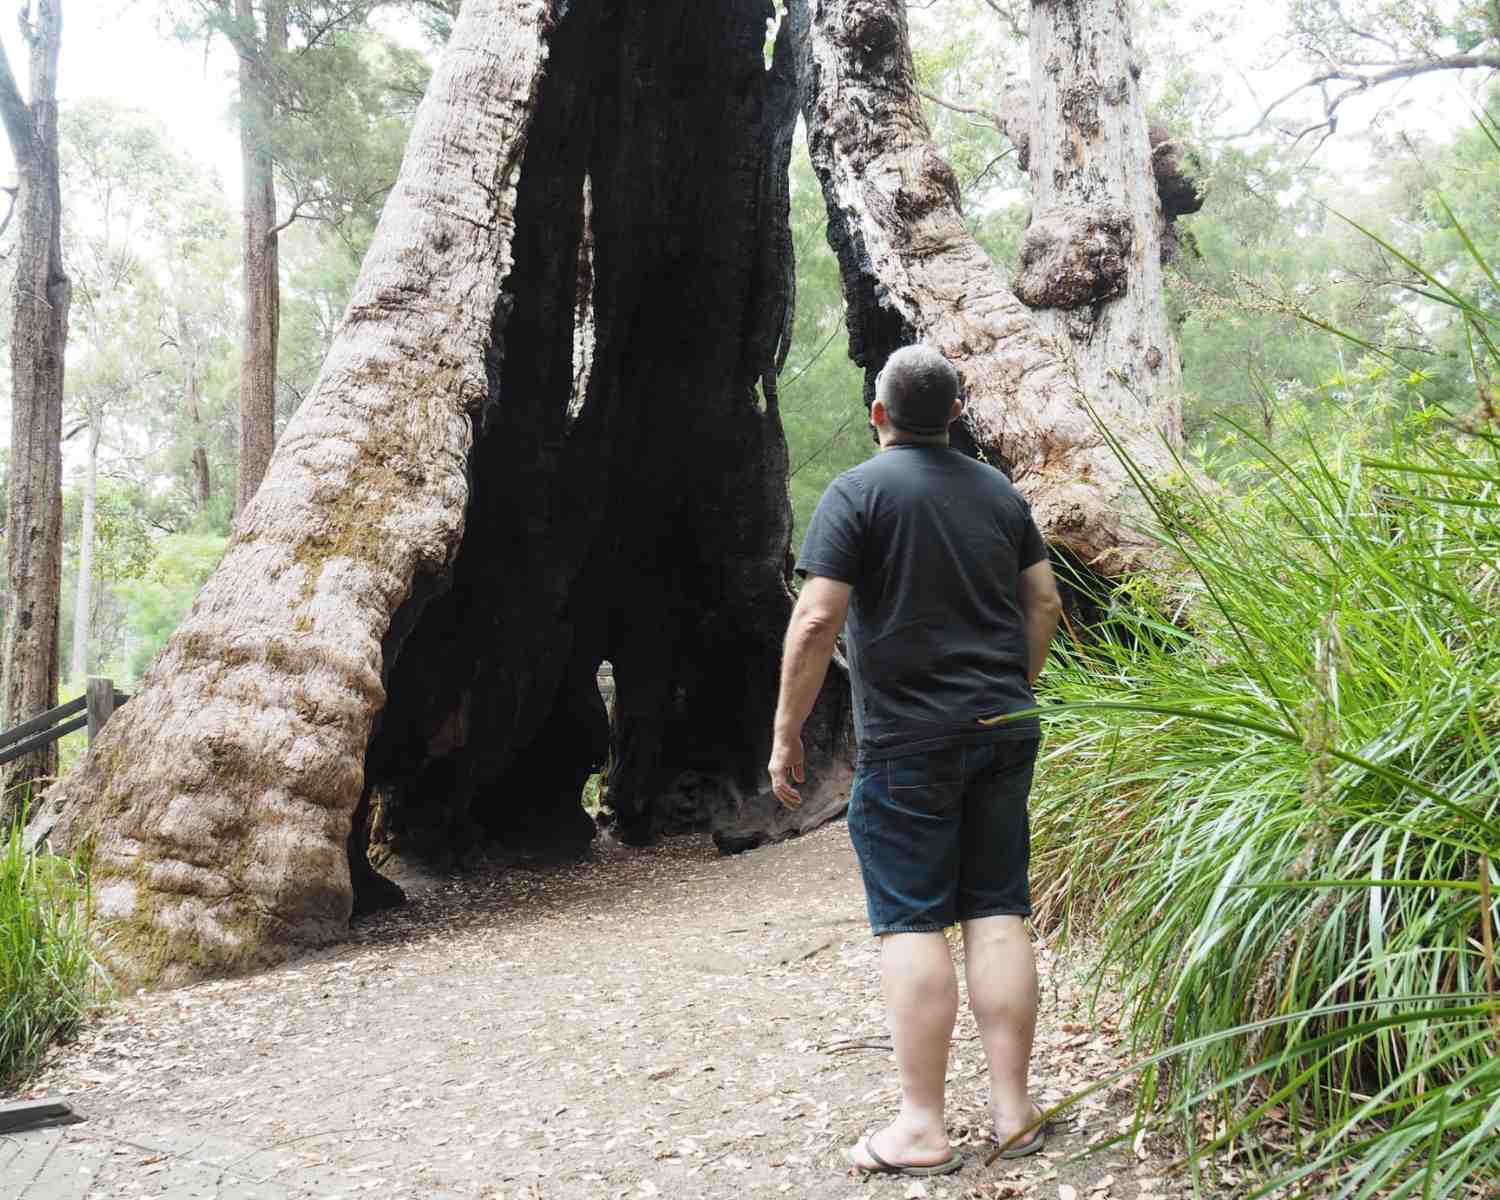 The Giant Tingle Tree in WA is a mammoth